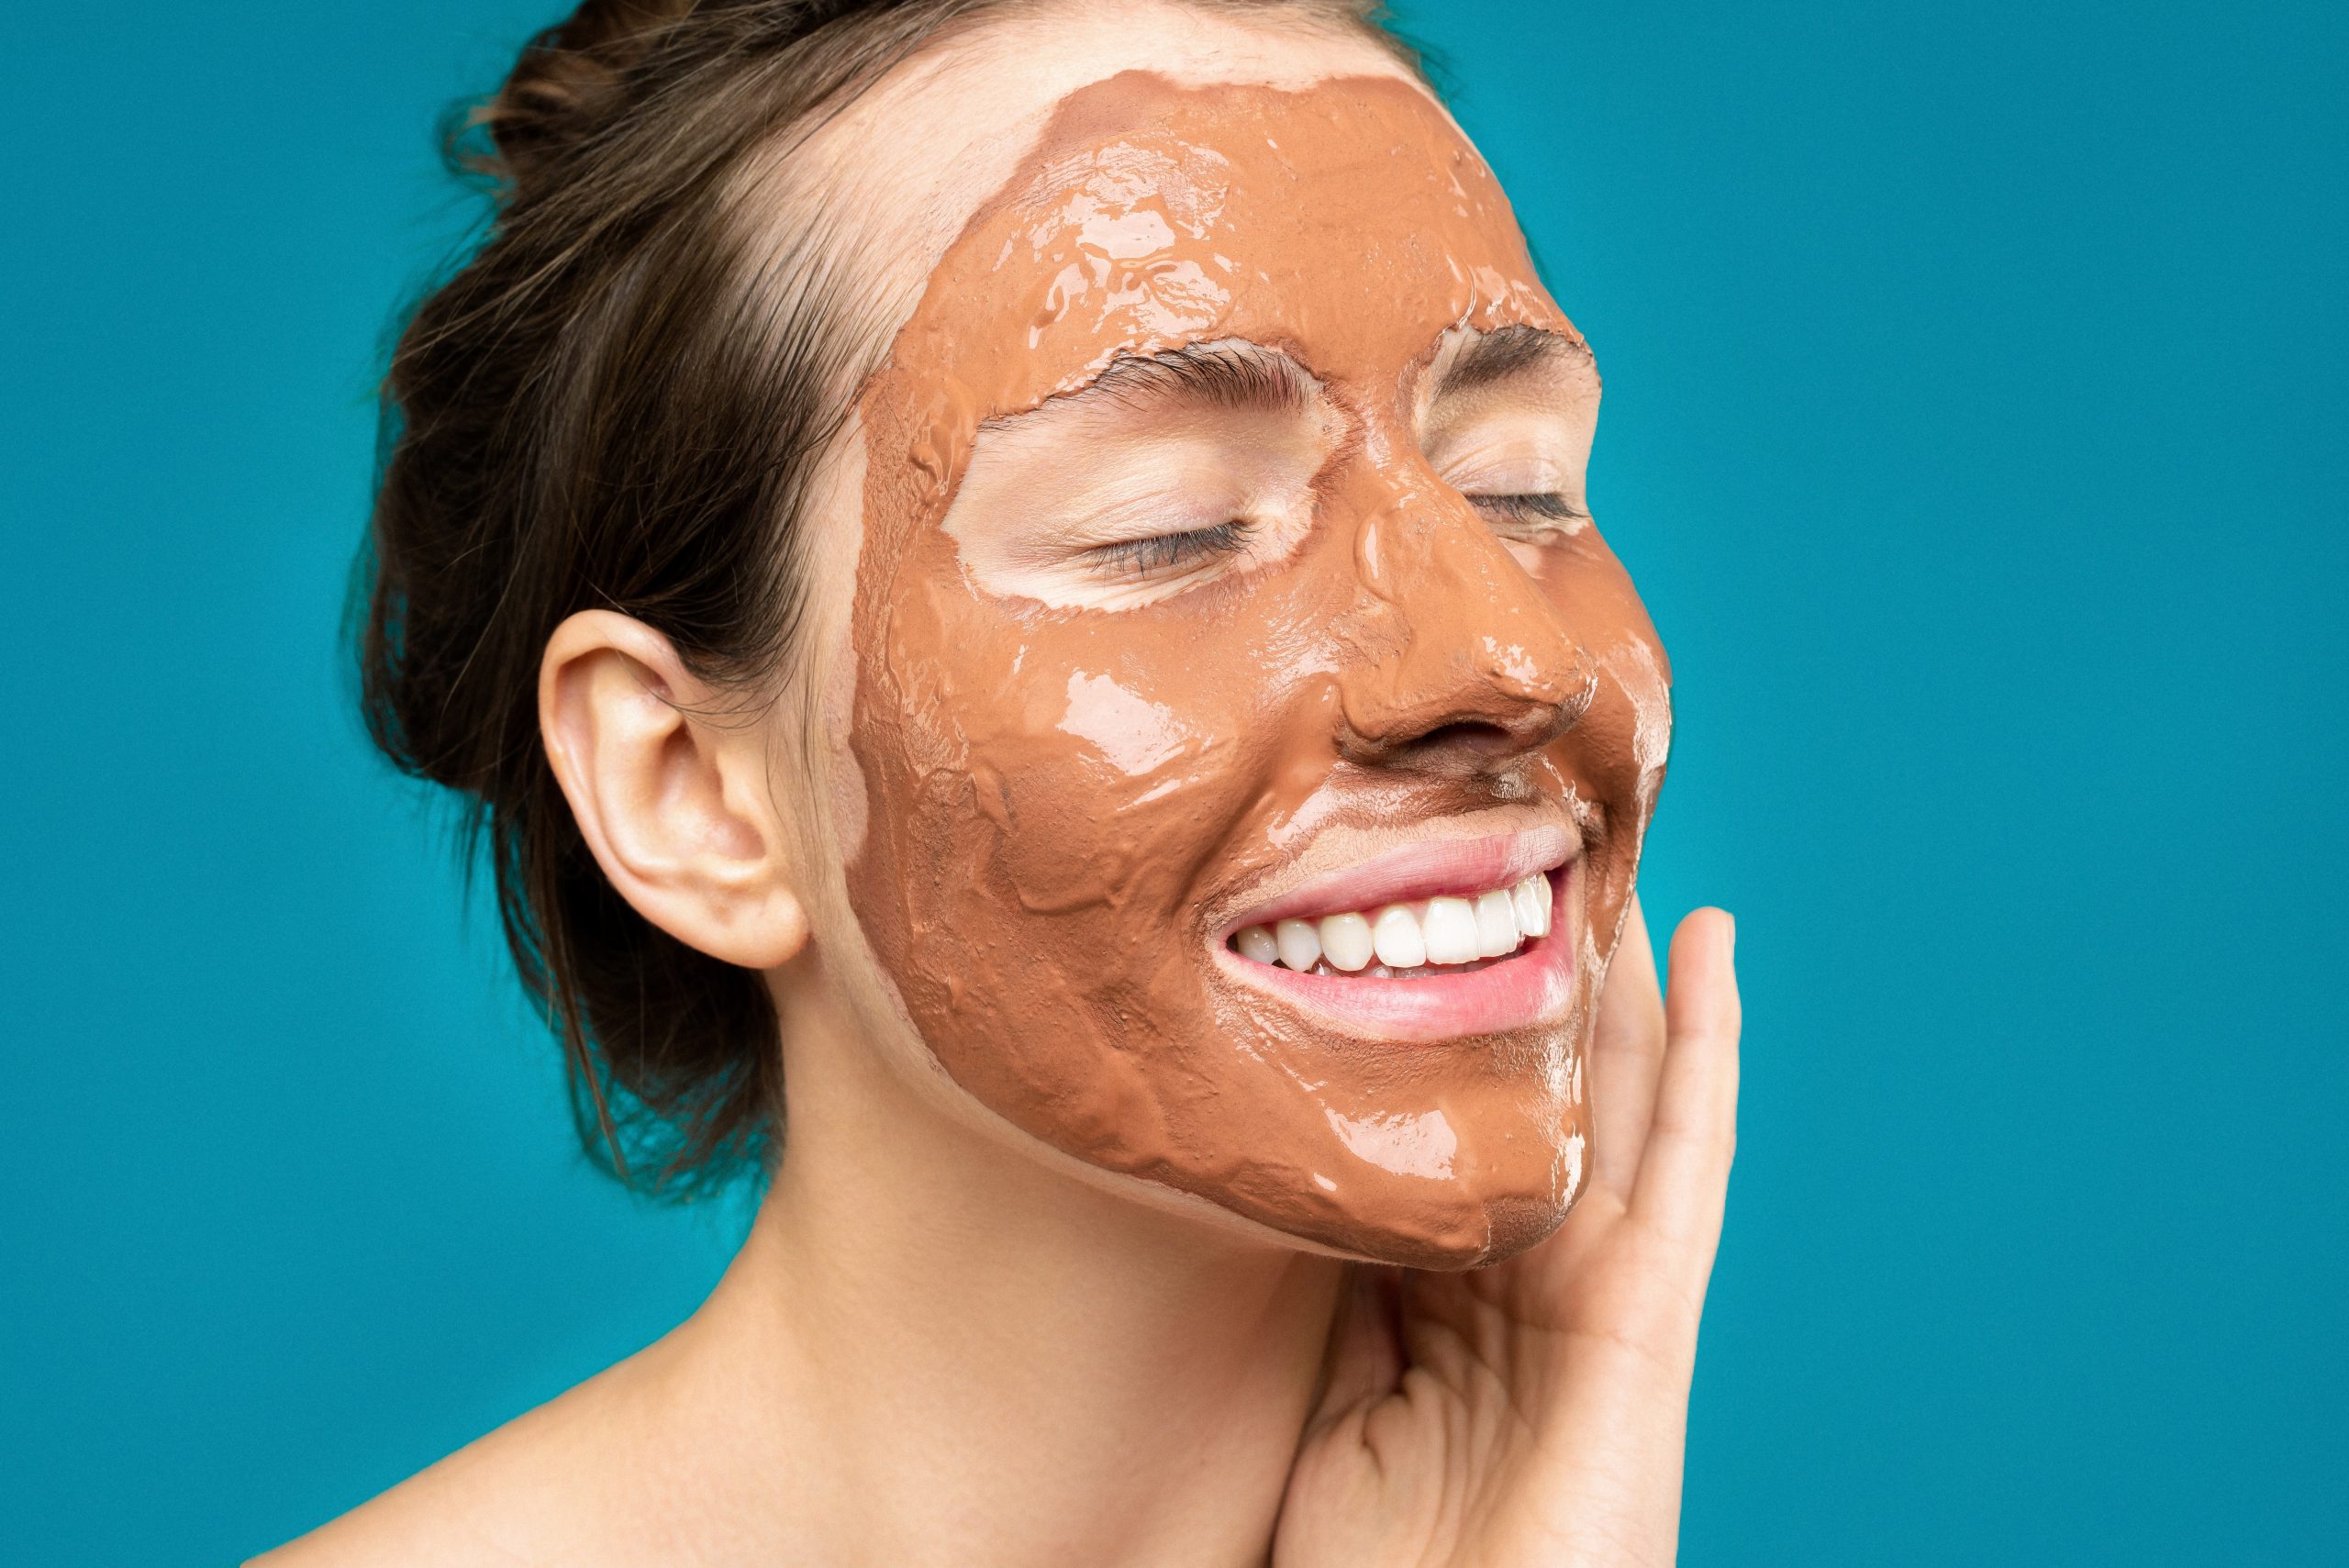 What are the benefits of applying masks regularly?